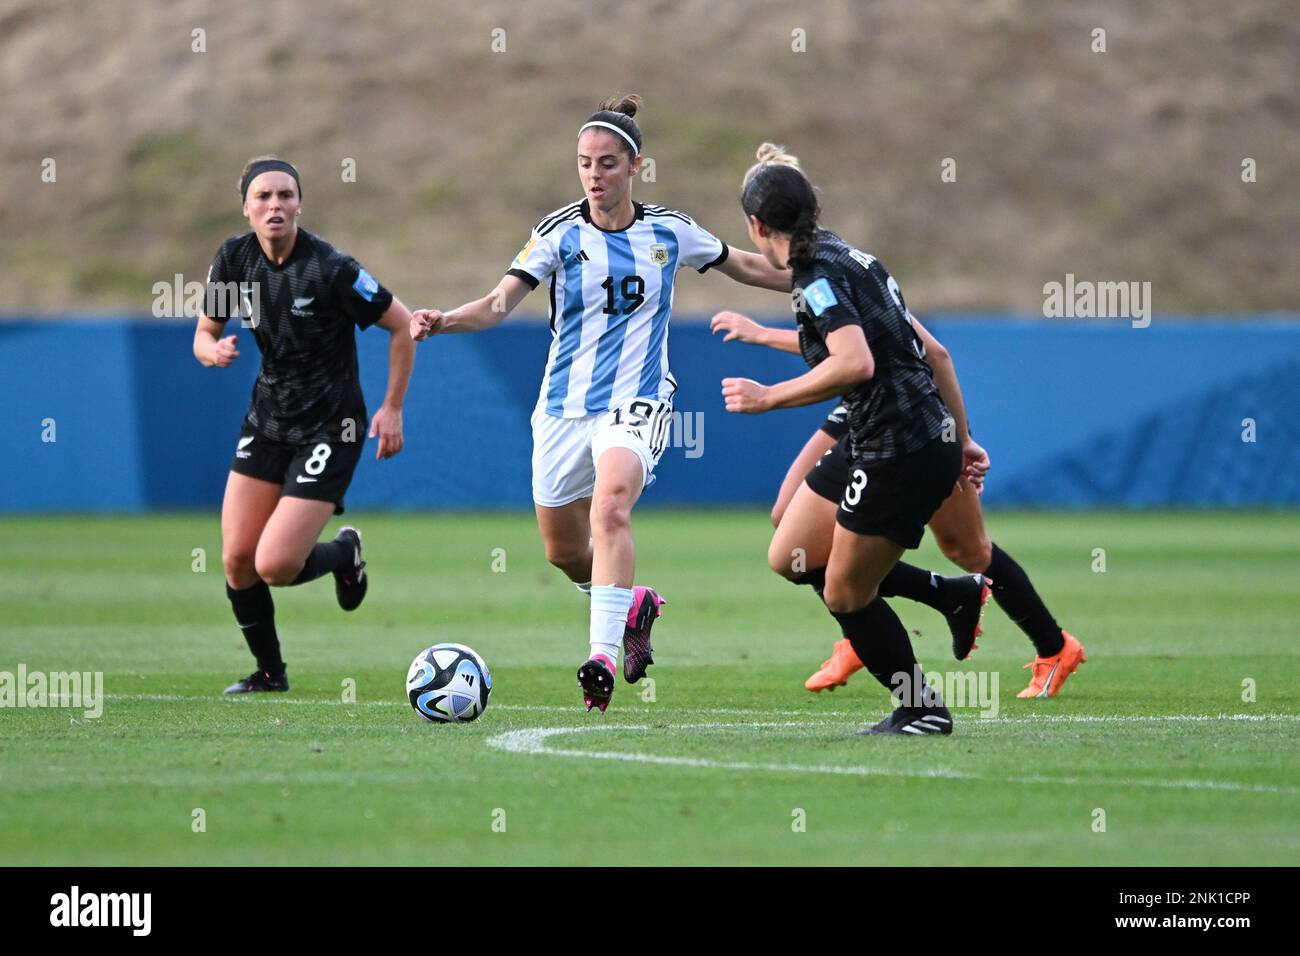 Auckland, New Zealand. 23rd Feb, 2023. Mariana Larroquette (L) of Argentina National Women's soccer team and Claudia Bunge (R) of New Zealand National Women's soccer teamin action during the FIFA Women's World Cup 2023 friendly game between Argentina and New Zealand held at the North Harbour Stadium. Final score: Argentina 1:0 New Zealand. Credit: SOPA Images Limited/Alamy Live News Stock Photo